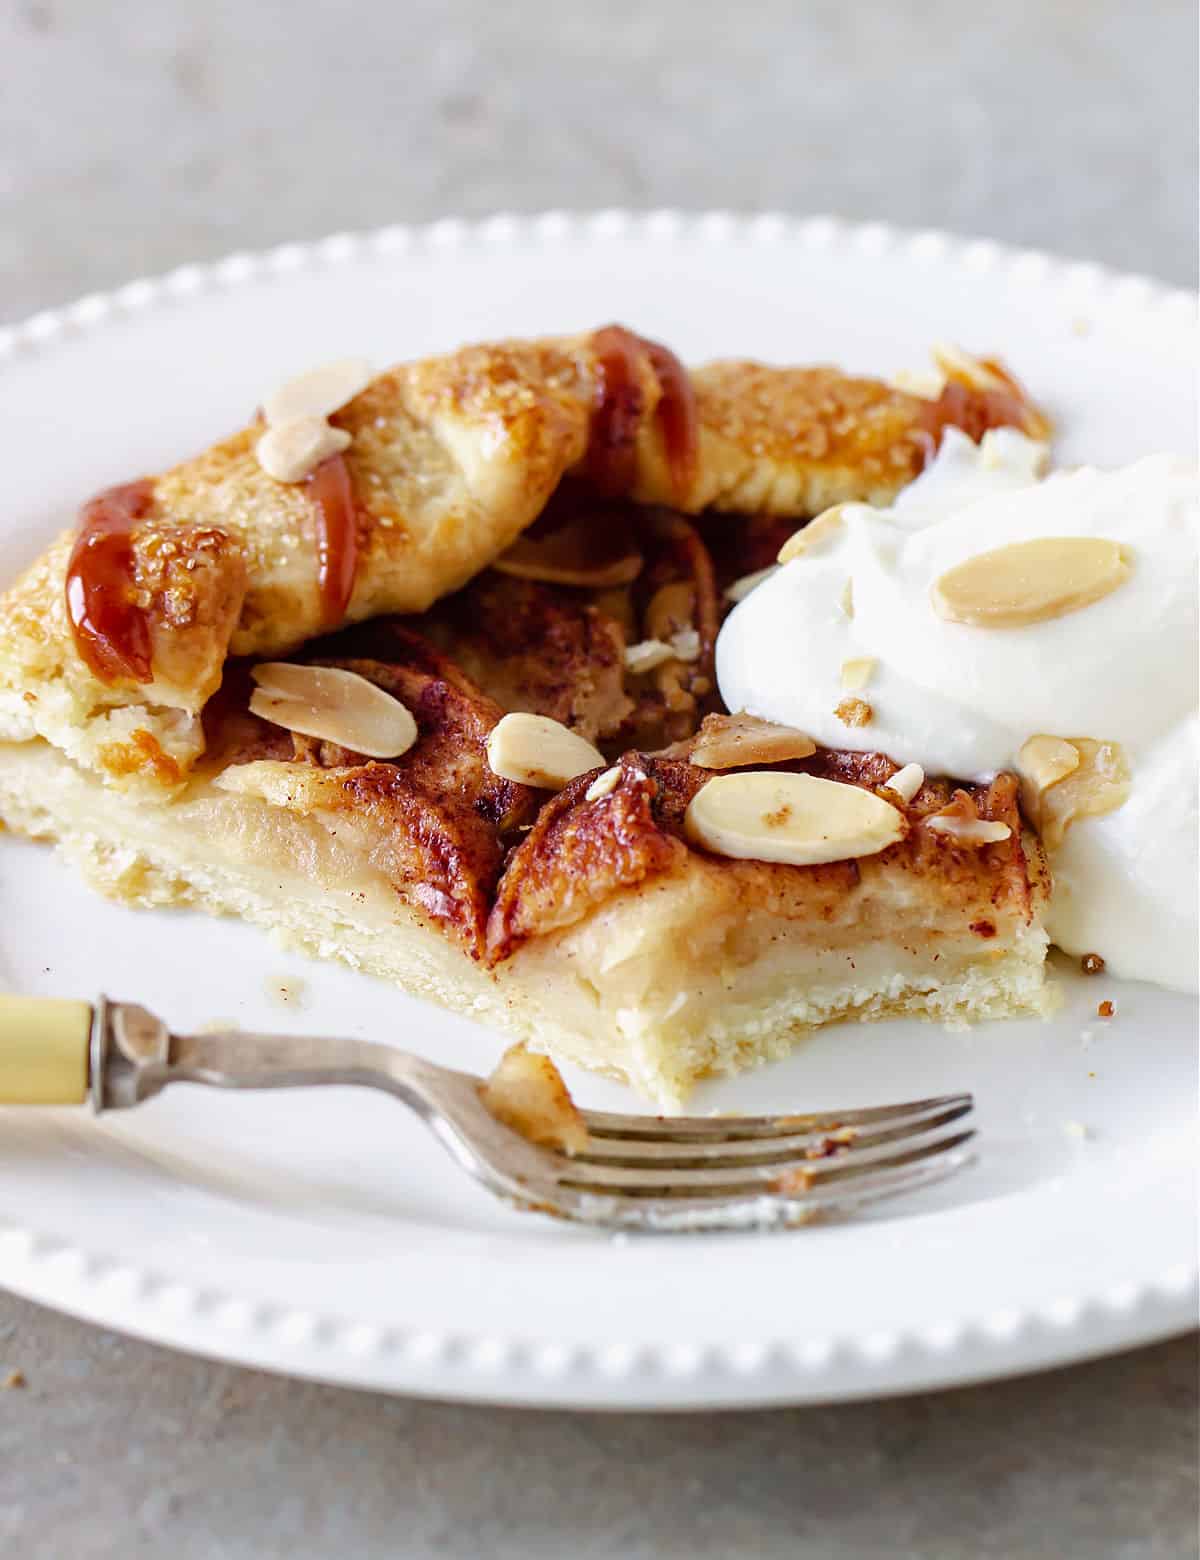 Slice of eaten apple galette with dollop of whipped cream on white plate with fork, grey surface